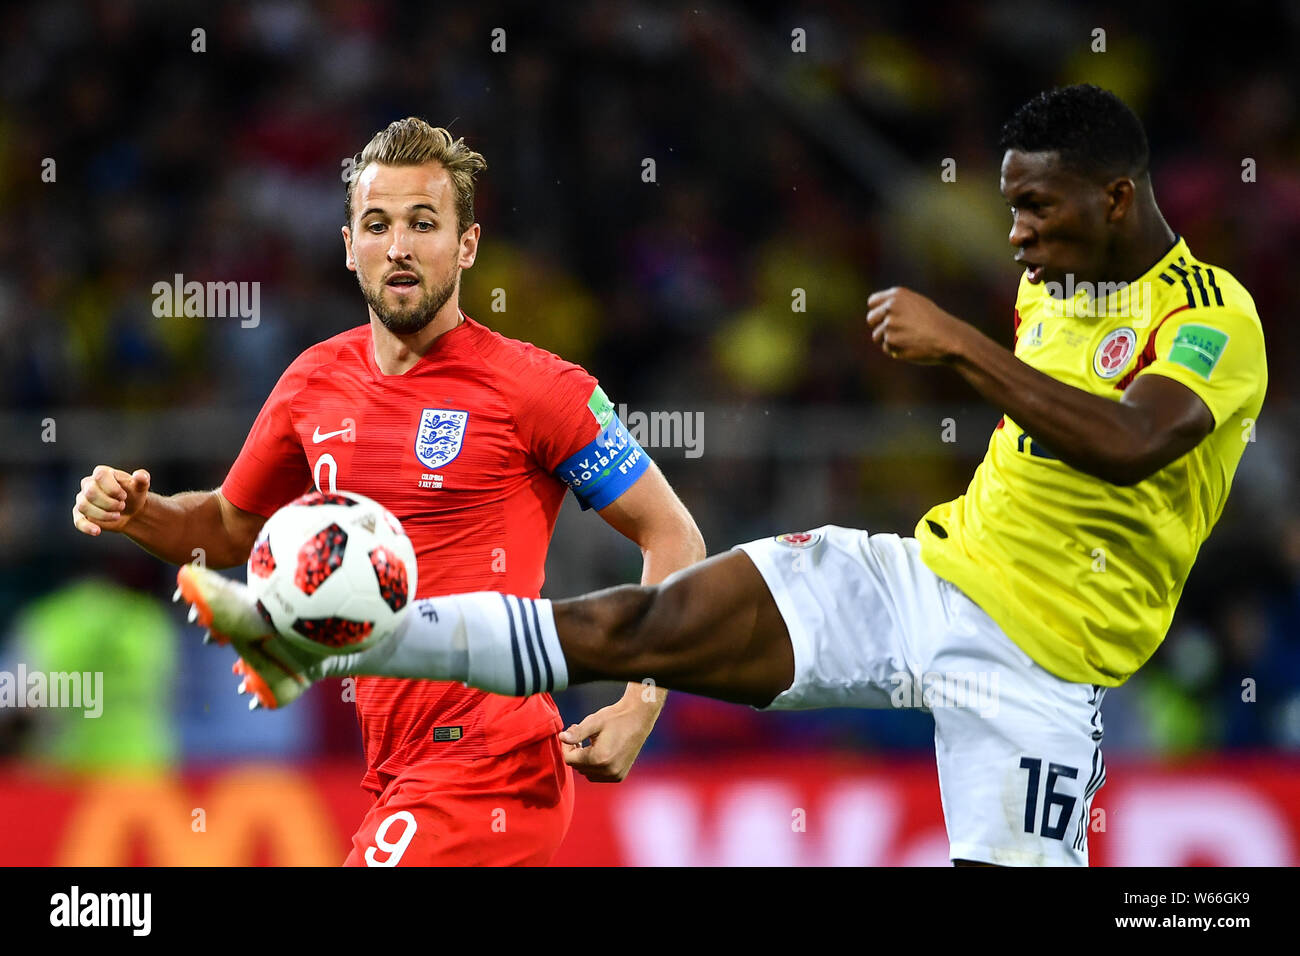 Jefferson Lerma of Columbia, right, challenges Jordan Henderson of England in their Round of 16 match during the 2018 FIFA World Cup in Moscow, Russia Stock Photo